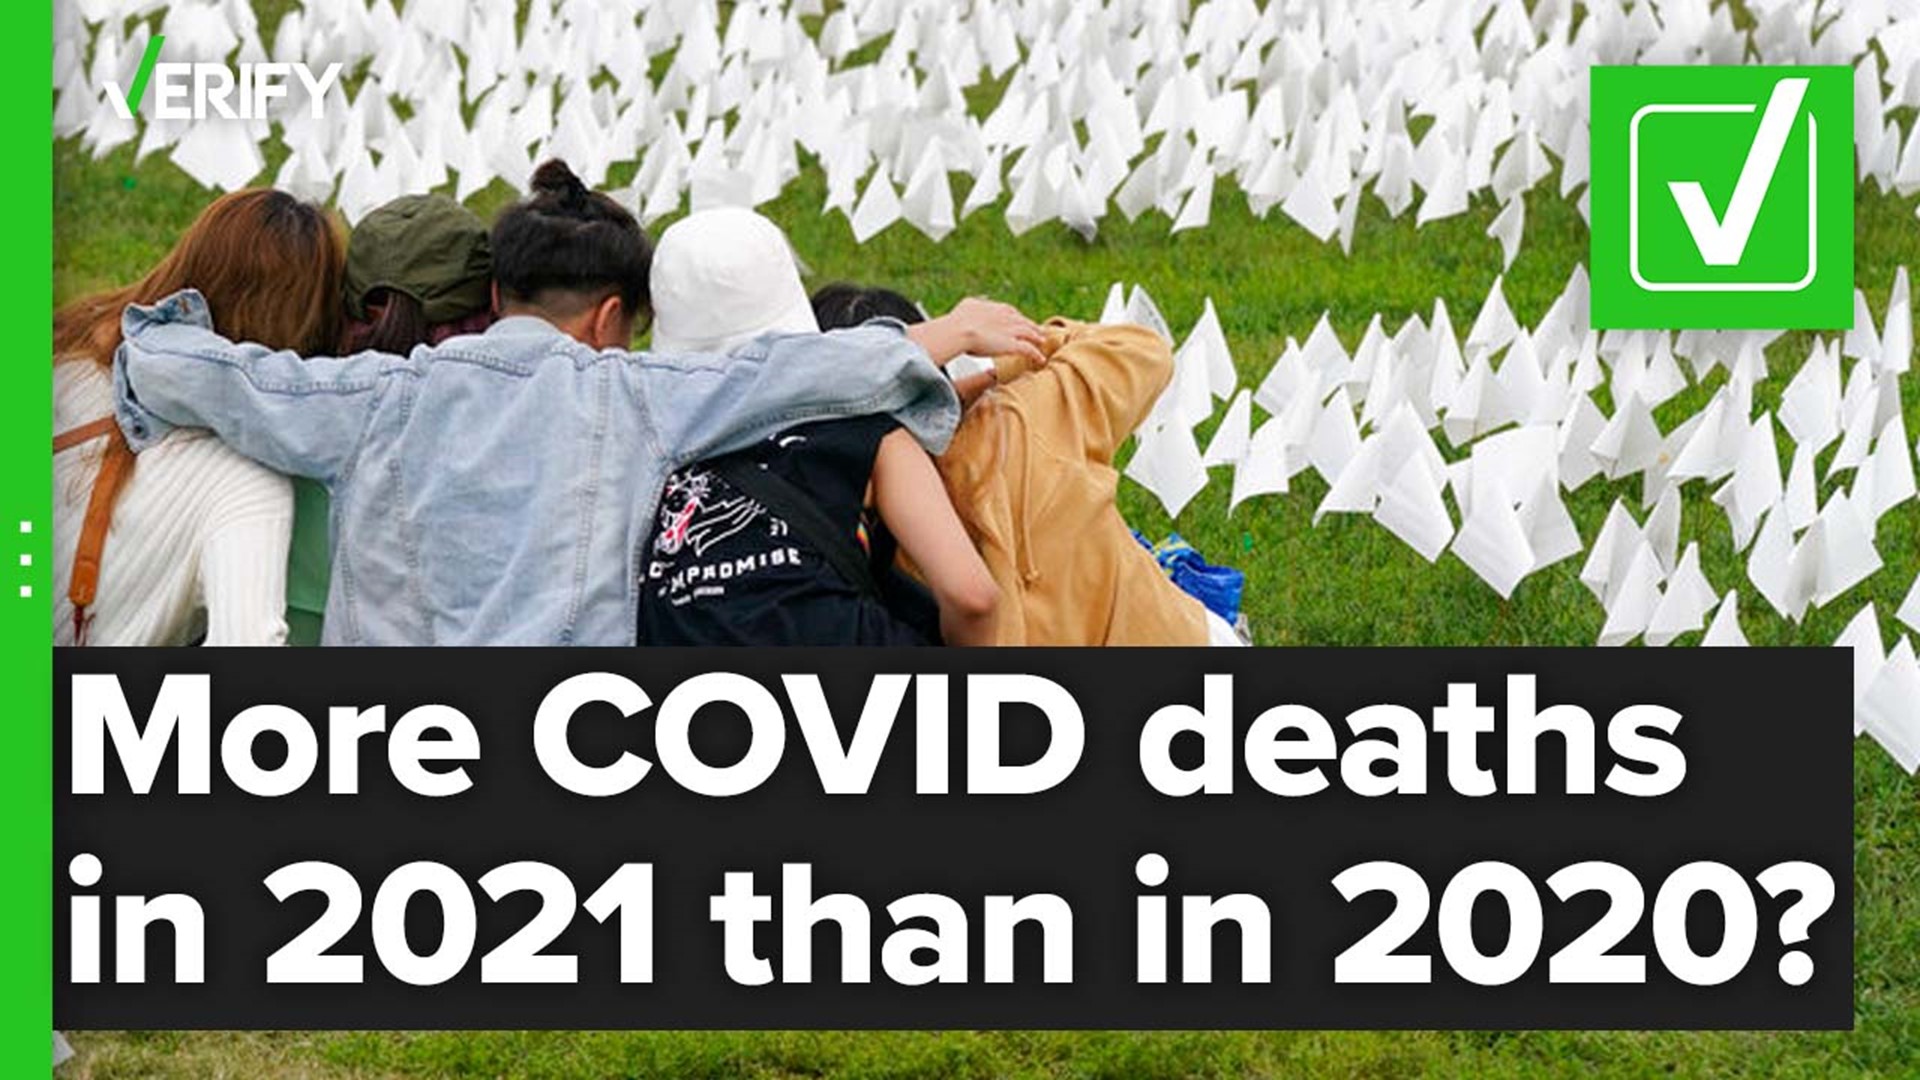 Experts say not enough people getting vaccinated, combined with the delta variant and fewer safety precautions have contributed to the 2021 COVID-19 death toll.